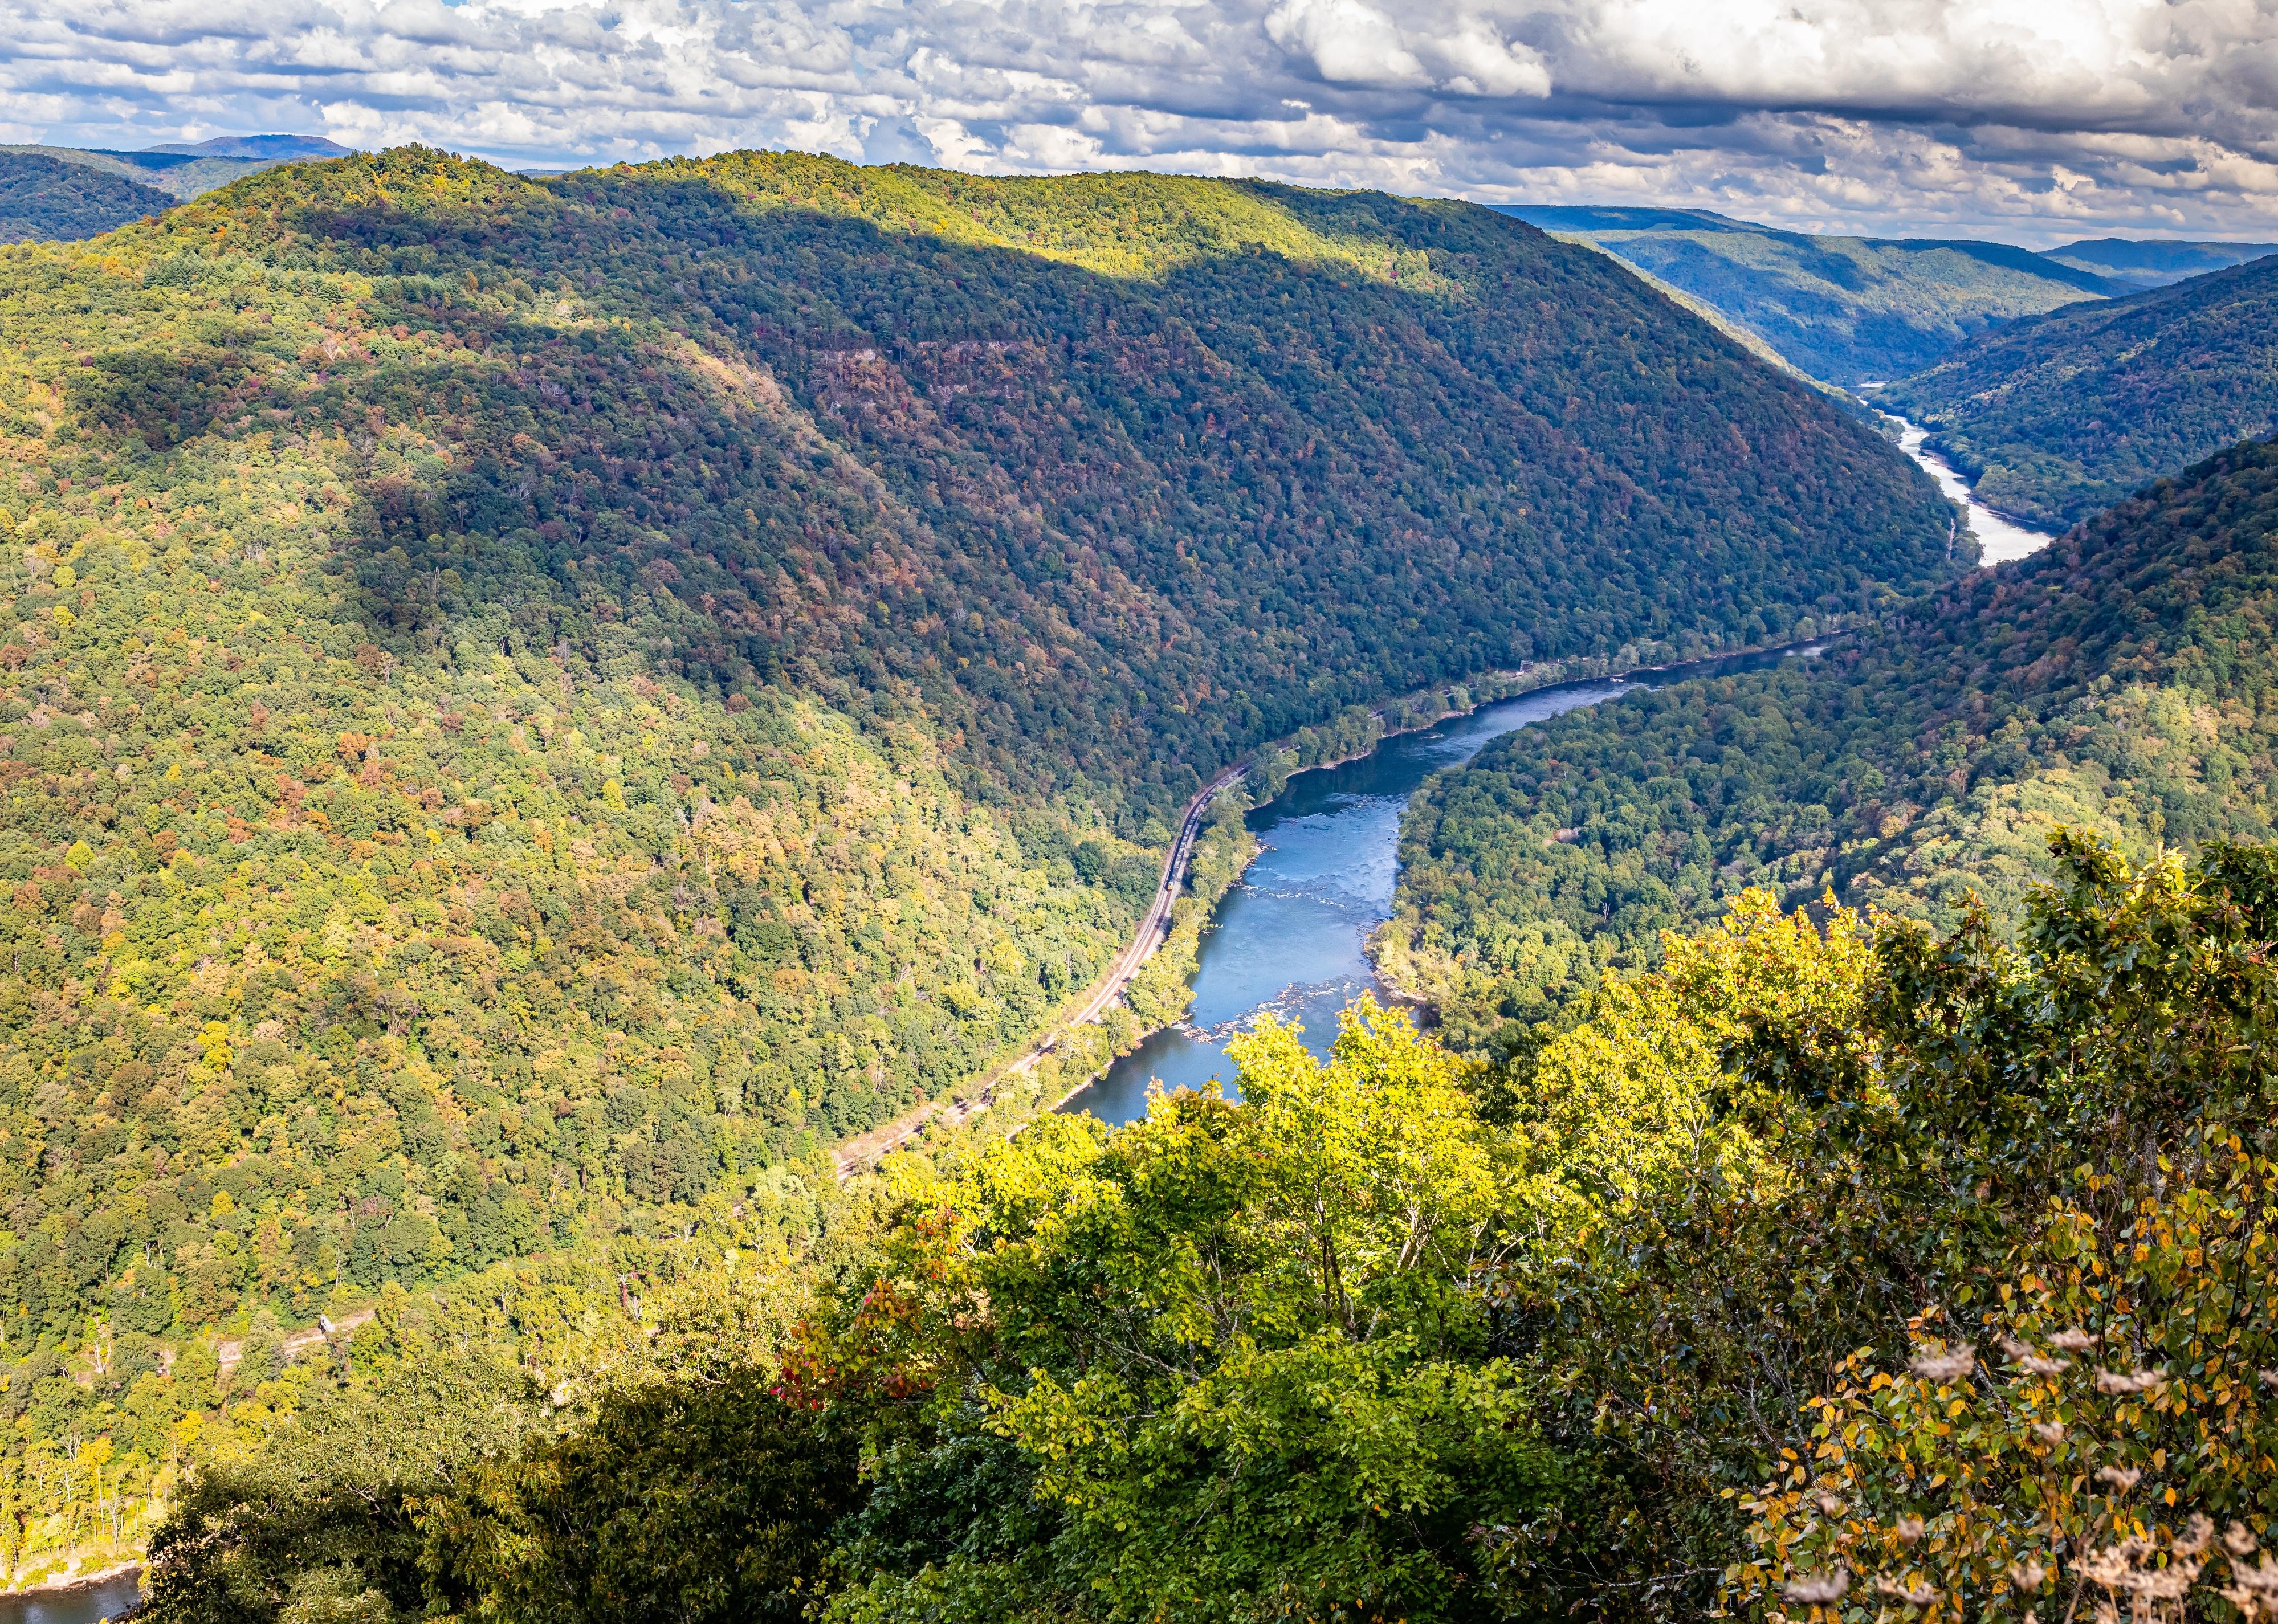 The famous Grandview Overlook of the New River at New River Gorge National Park.